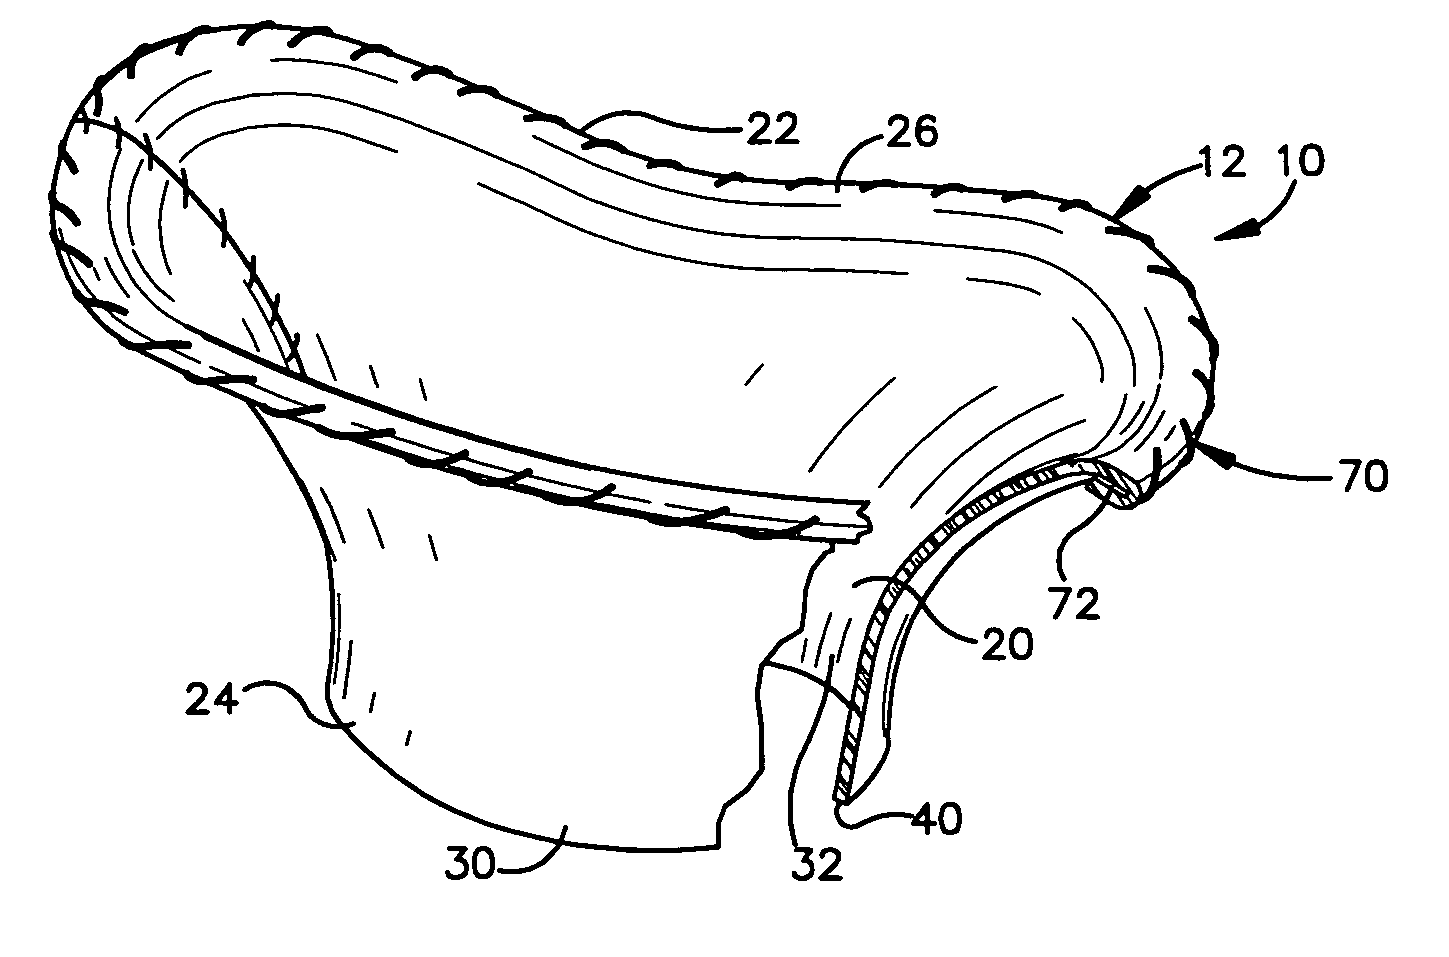 Method and apparatus for replacing a mitral valve with a stentless bioprosthetic valve